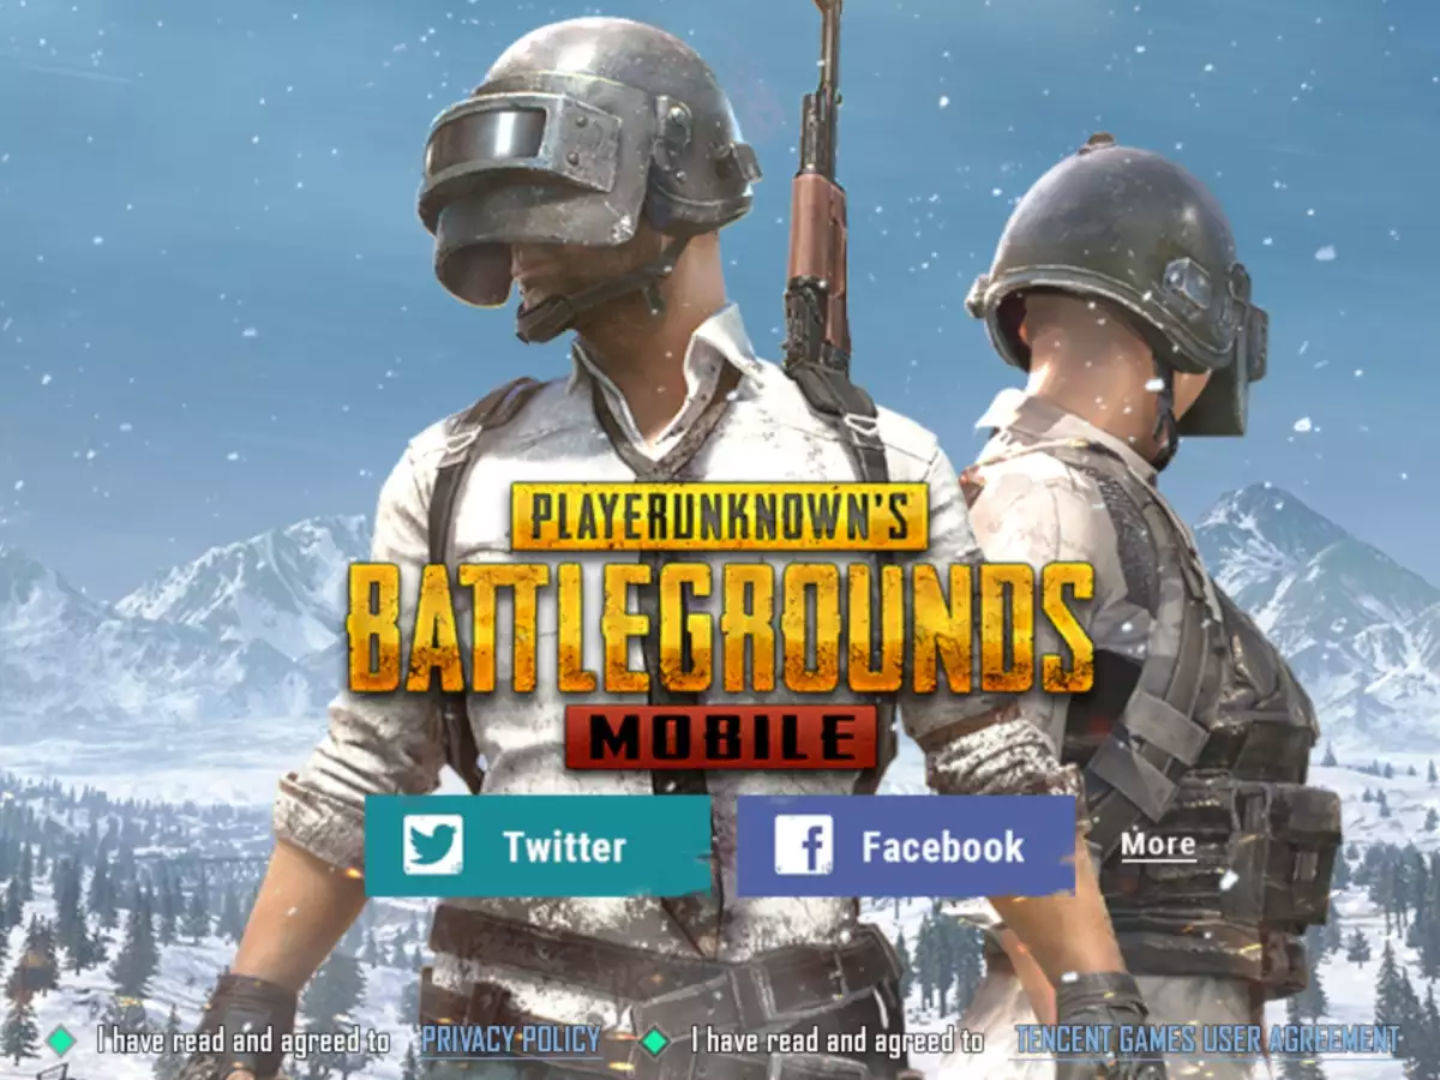 PUBG mobile update: PUBG Mobile update 0.12 to launch next ... - 